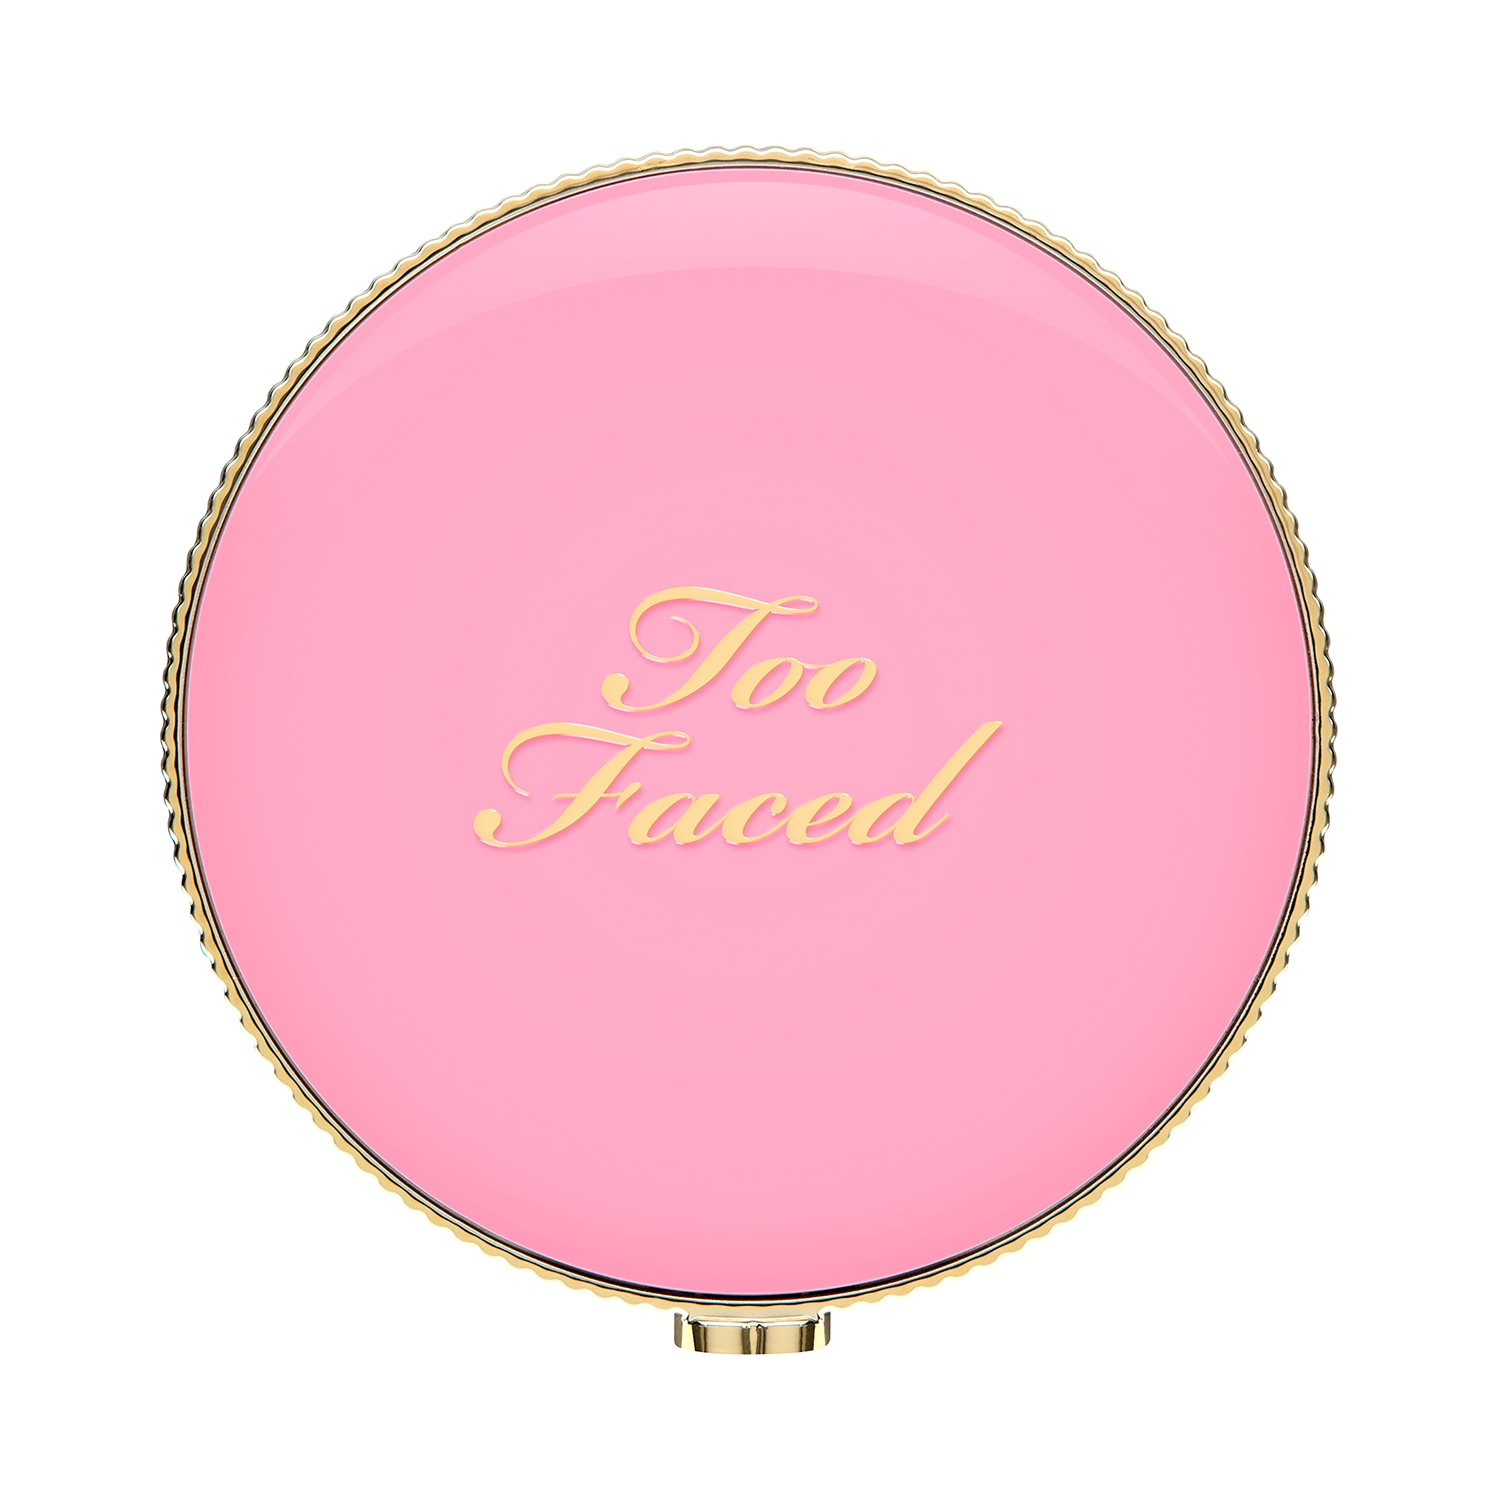 Too Faced | Too Faced Cloud Crush Blush - Candy Clouds (4.8g)